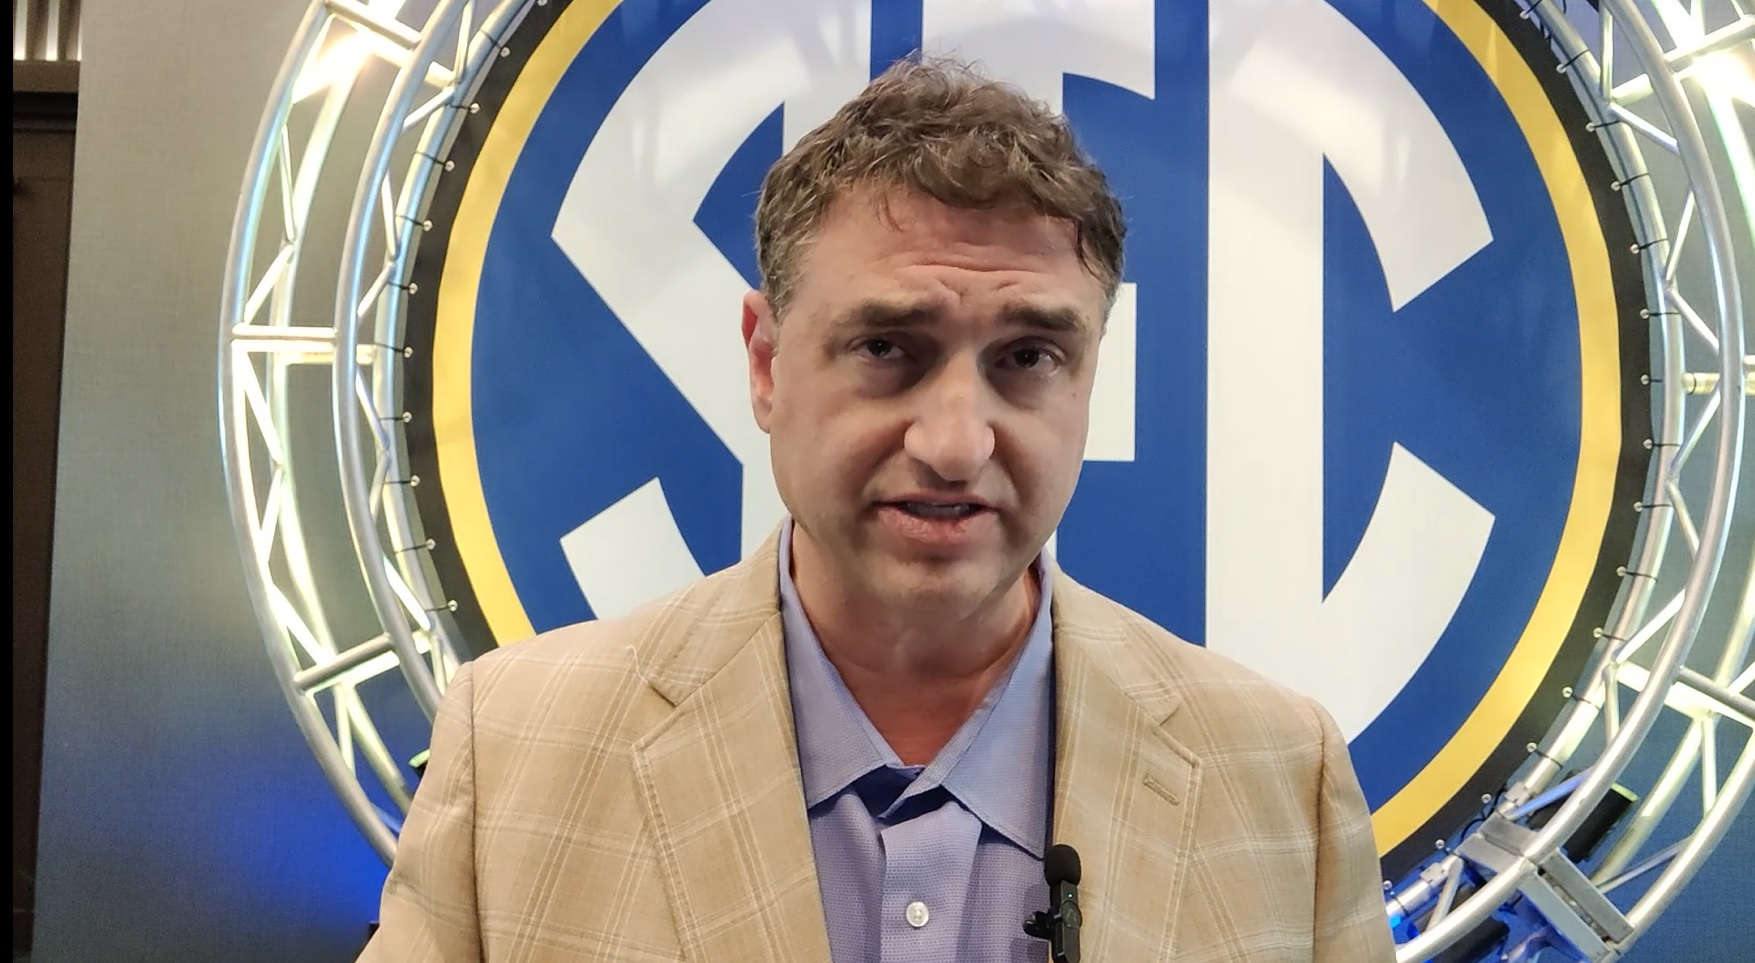 #SECMD23 Day 4 recap & comments by Vols (7.20.23)